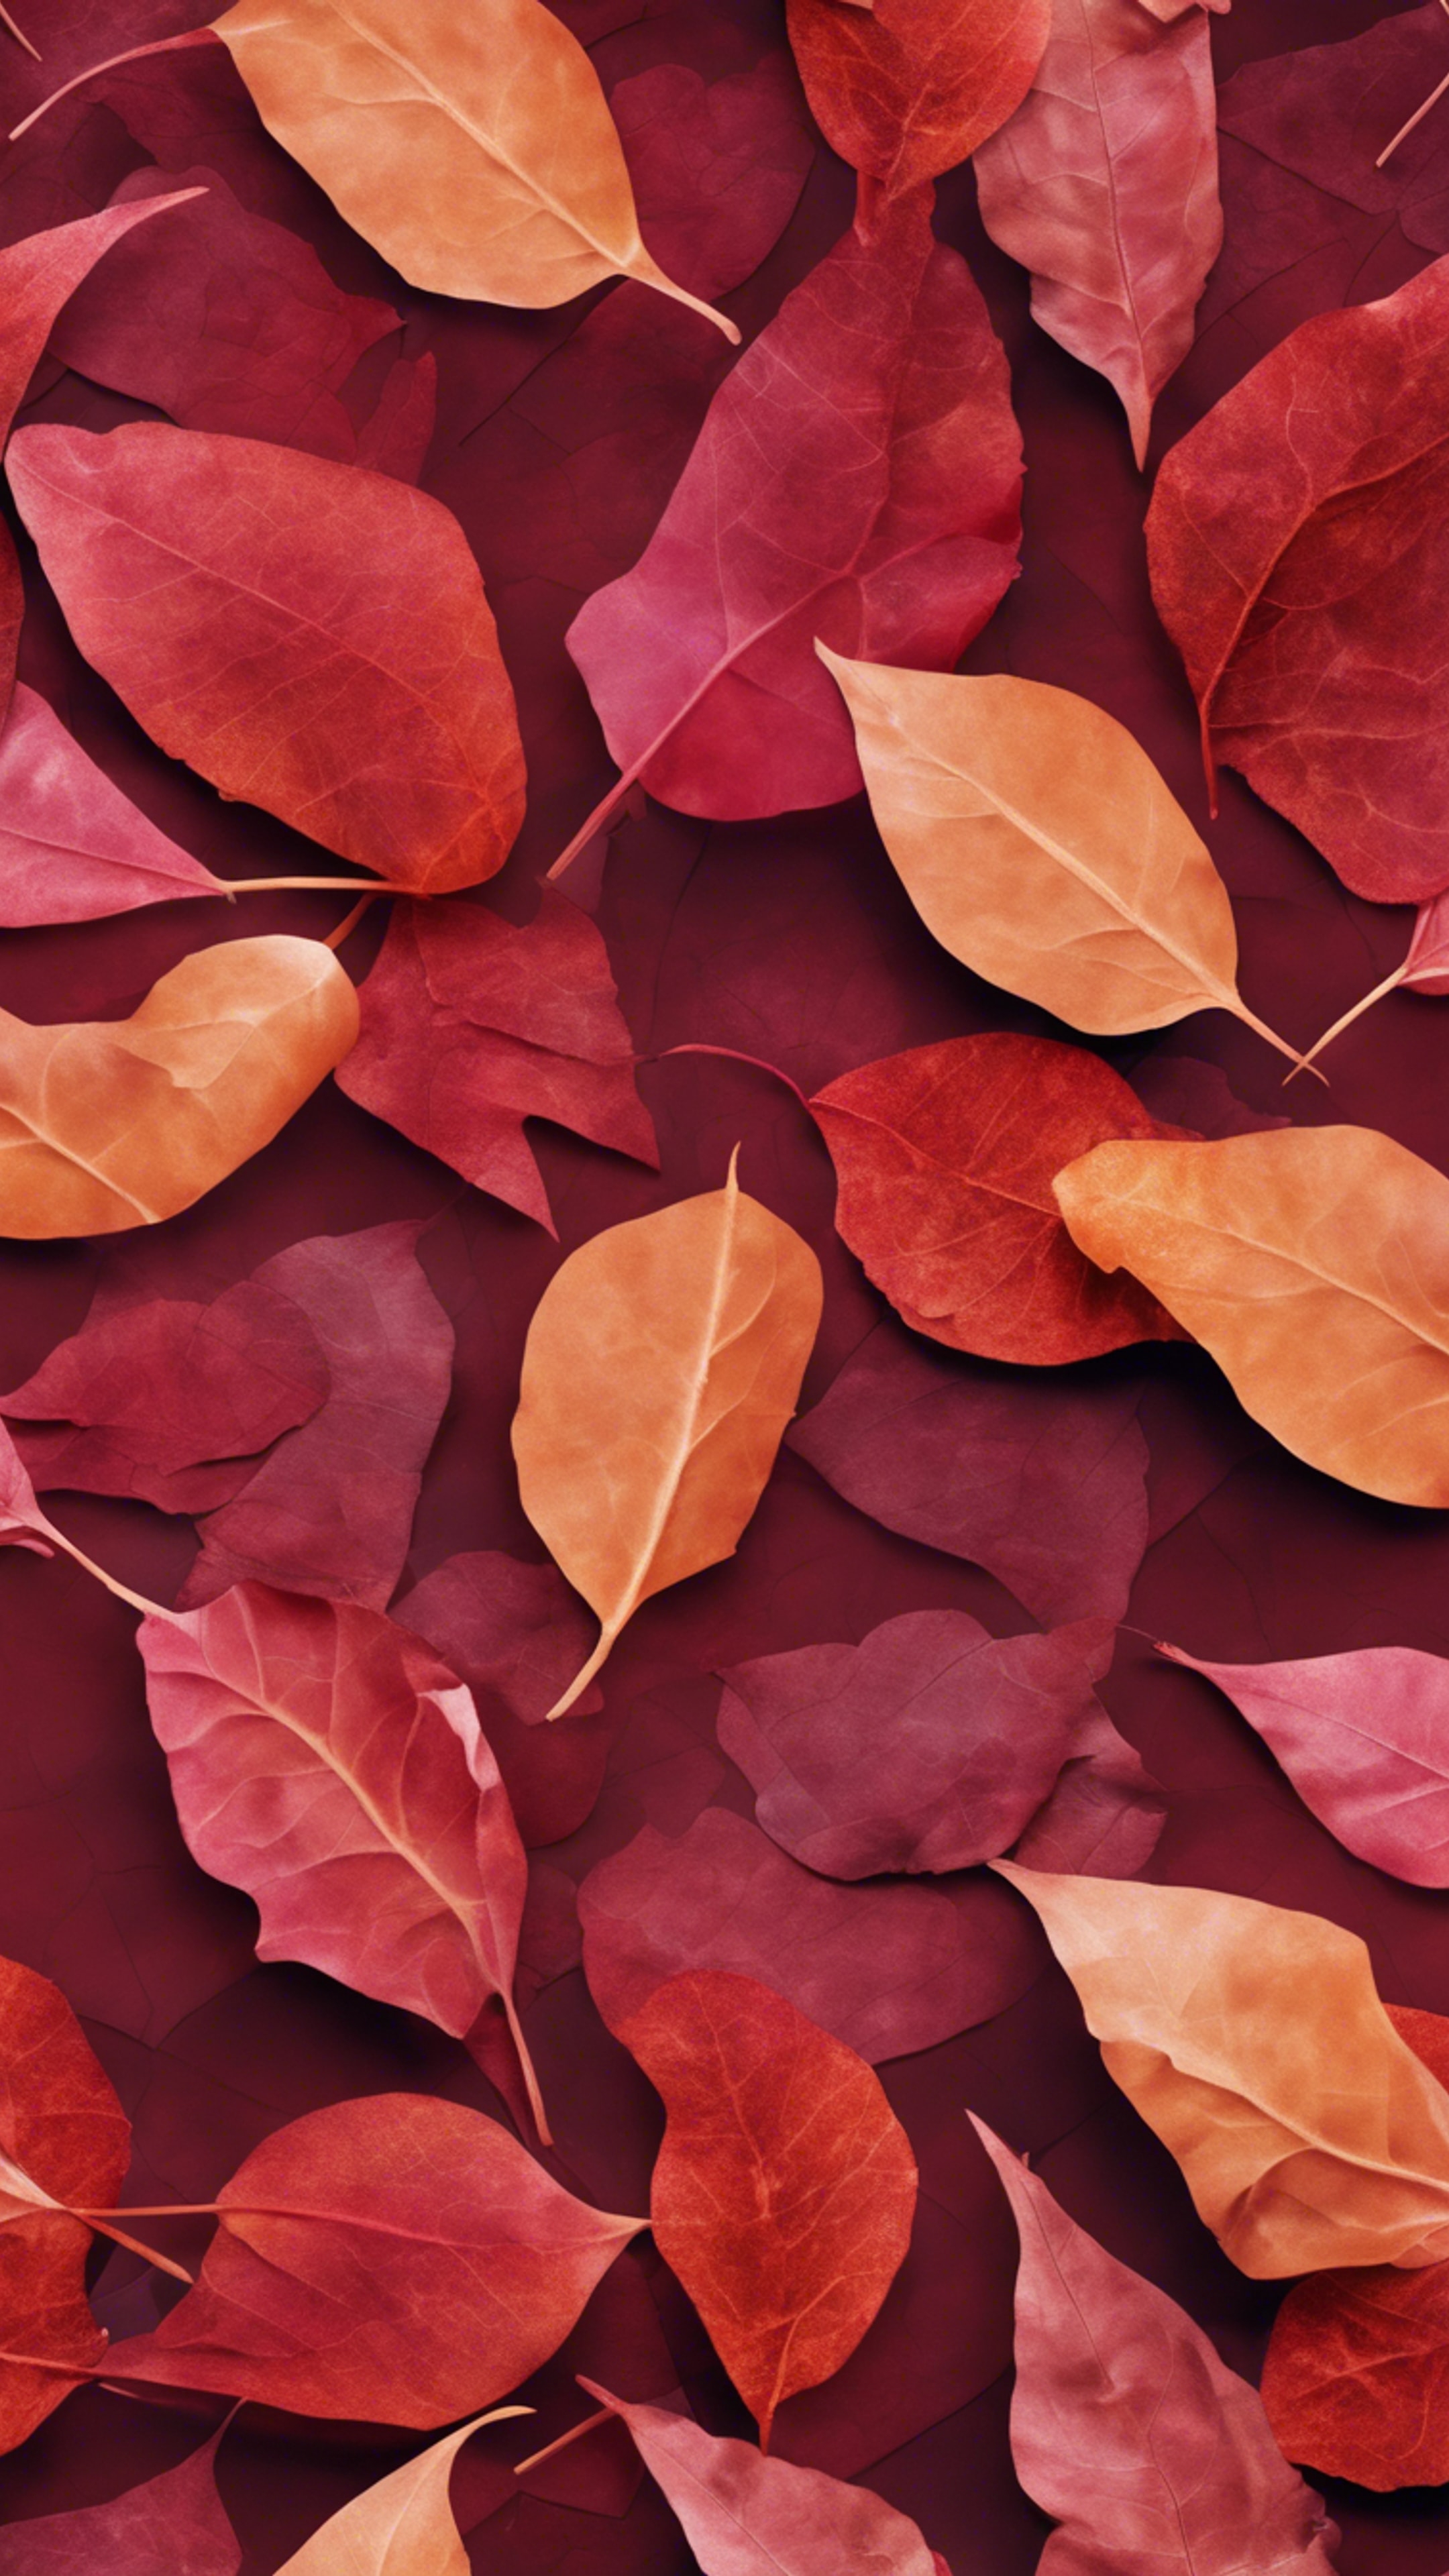 An abstract, tessellating pattern of fiery ruby and russet shapes, reminiscent of falling leaves in autumn. Wallpaper[1bca3c6cf9b9400393d6]